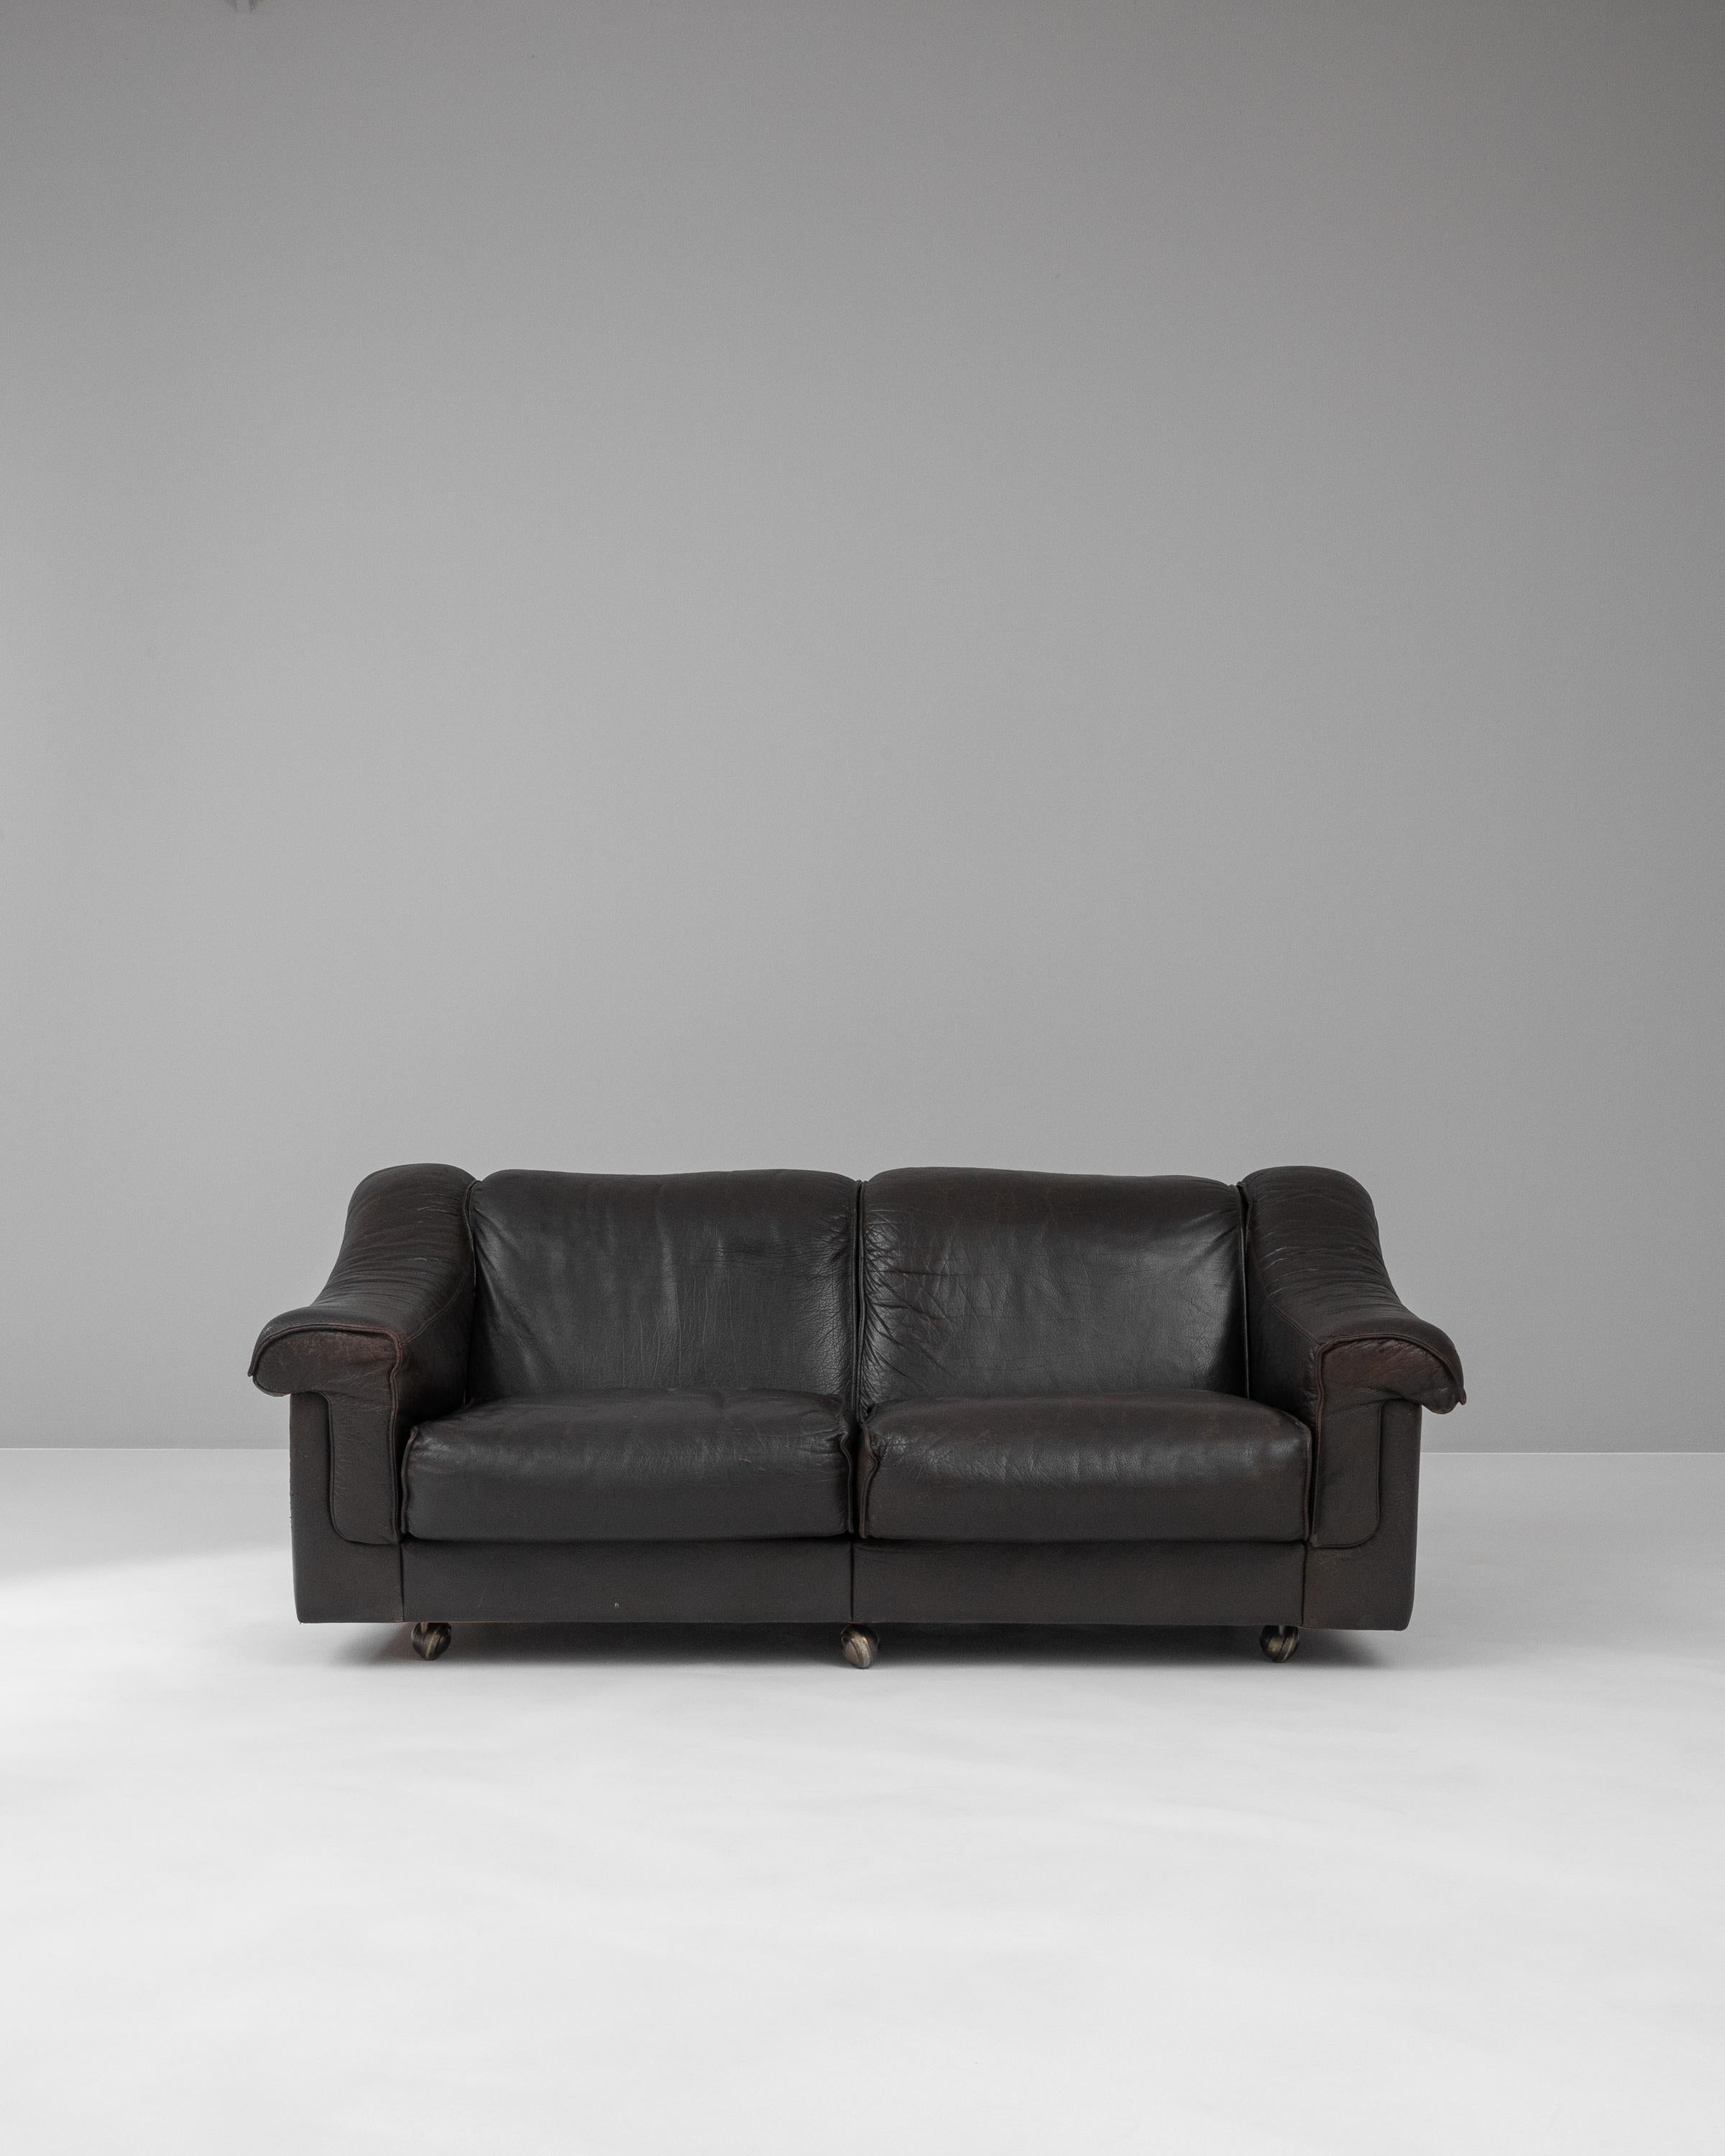 This 20th Century Danish Leather Sofa encapsulates the elegance of Scandinavian design, offering a seamless blend of style and comfort. Crafted with the utmost attention to quality, the sofa features rich, chocolate leather that has matured with